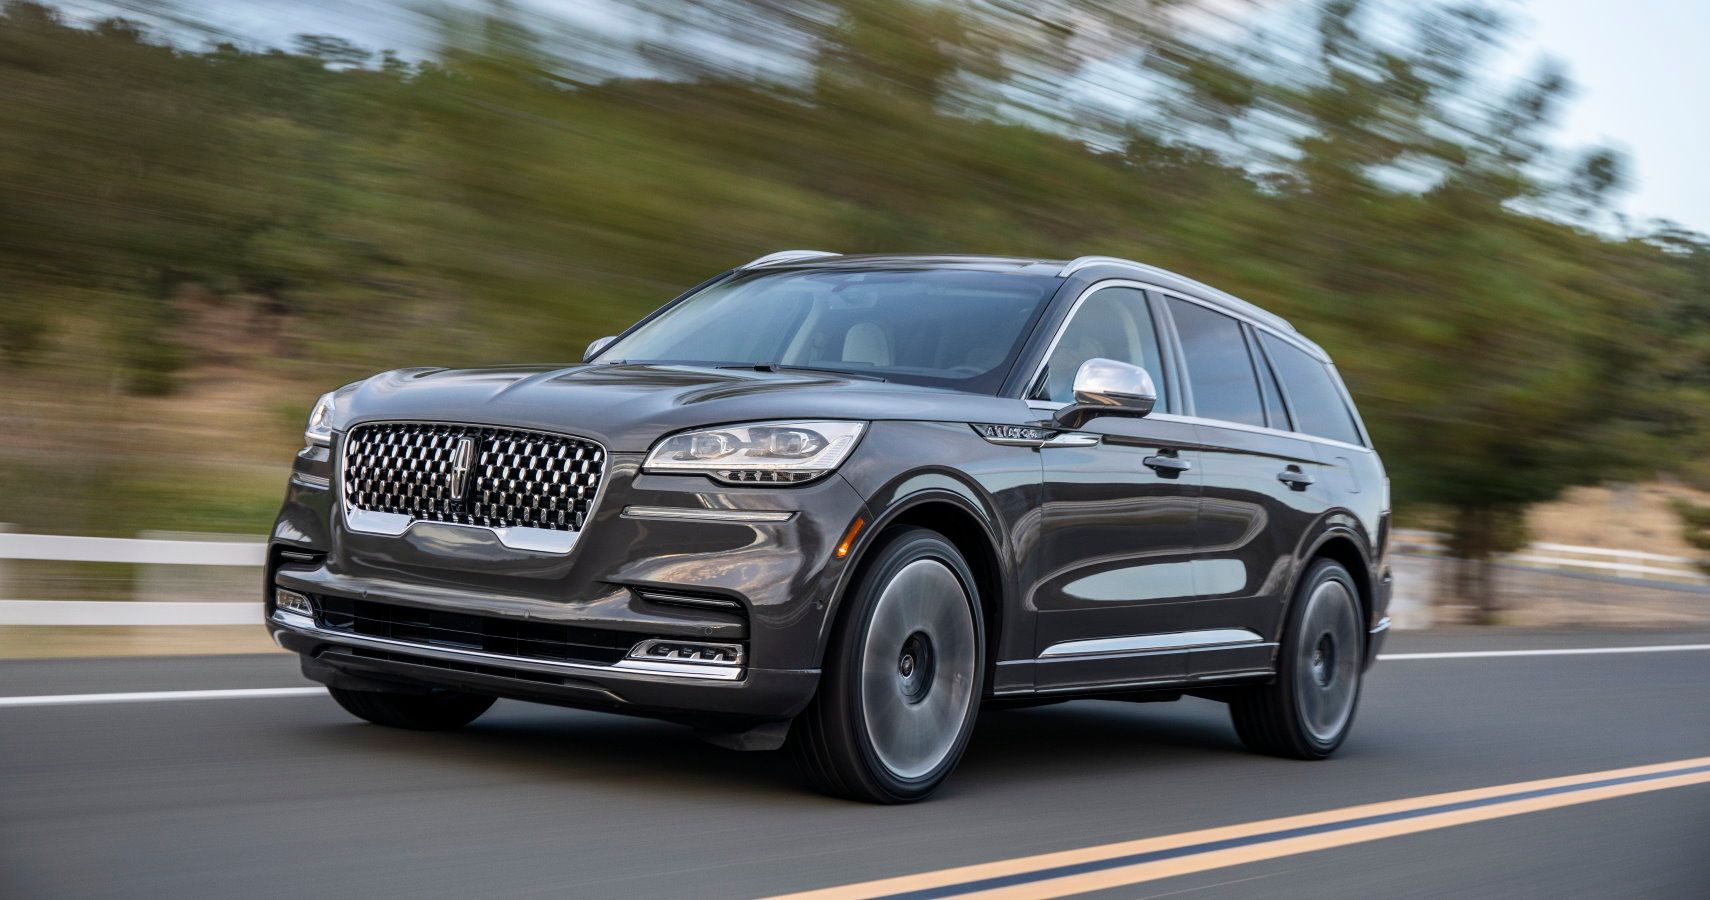 The all-new 2020 Lincoln Aviator defines effortless luxury performance among premium SUVs, offering impressive power and capability combined with sleek elegance and intuitive technology.